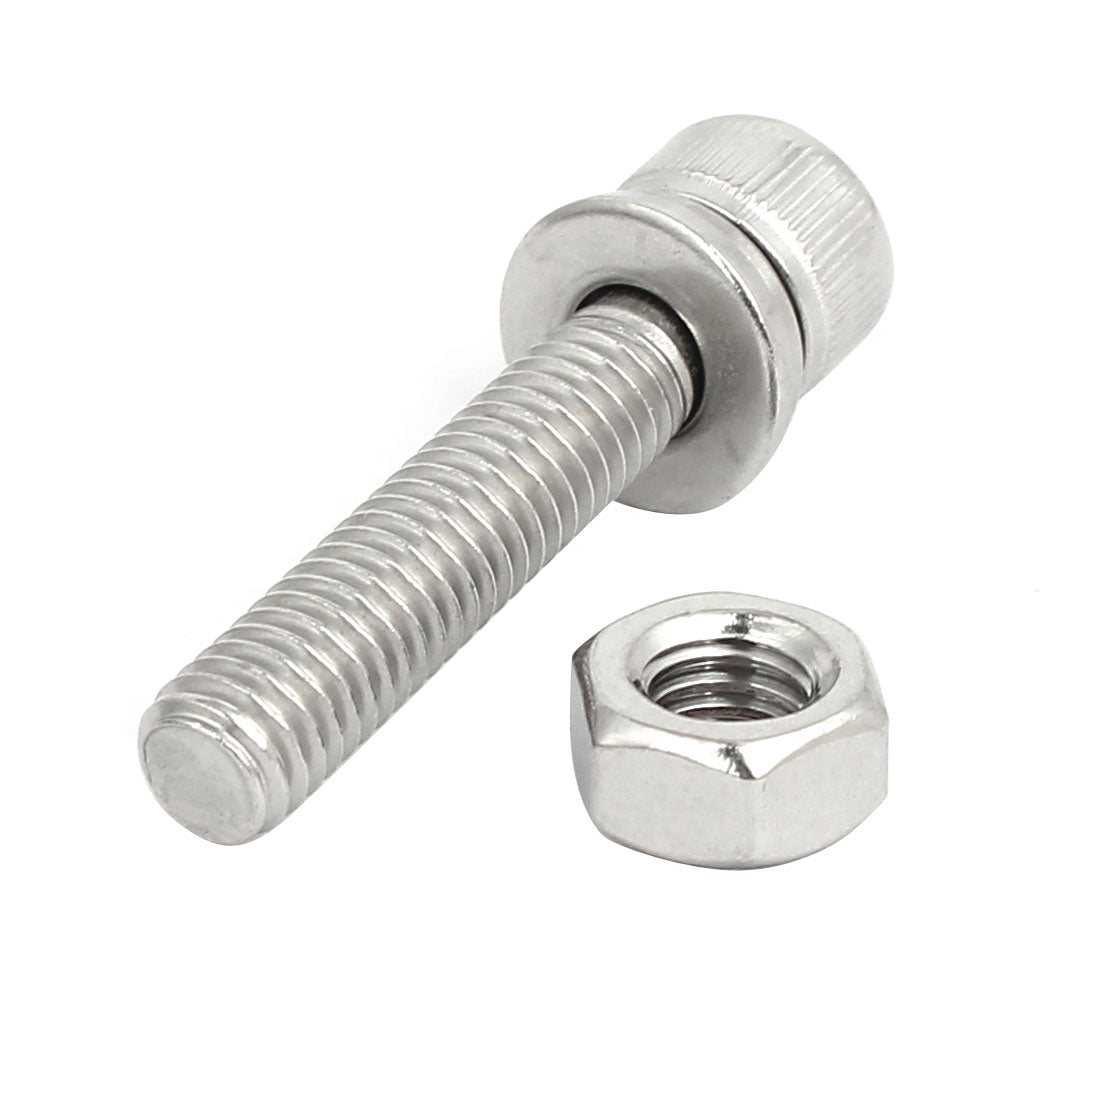 uxcell Uxcell M6x30mm 304 Stainless Steel Hex Socket Head Cap Bolt Screw Nut w Washer 8 Sets